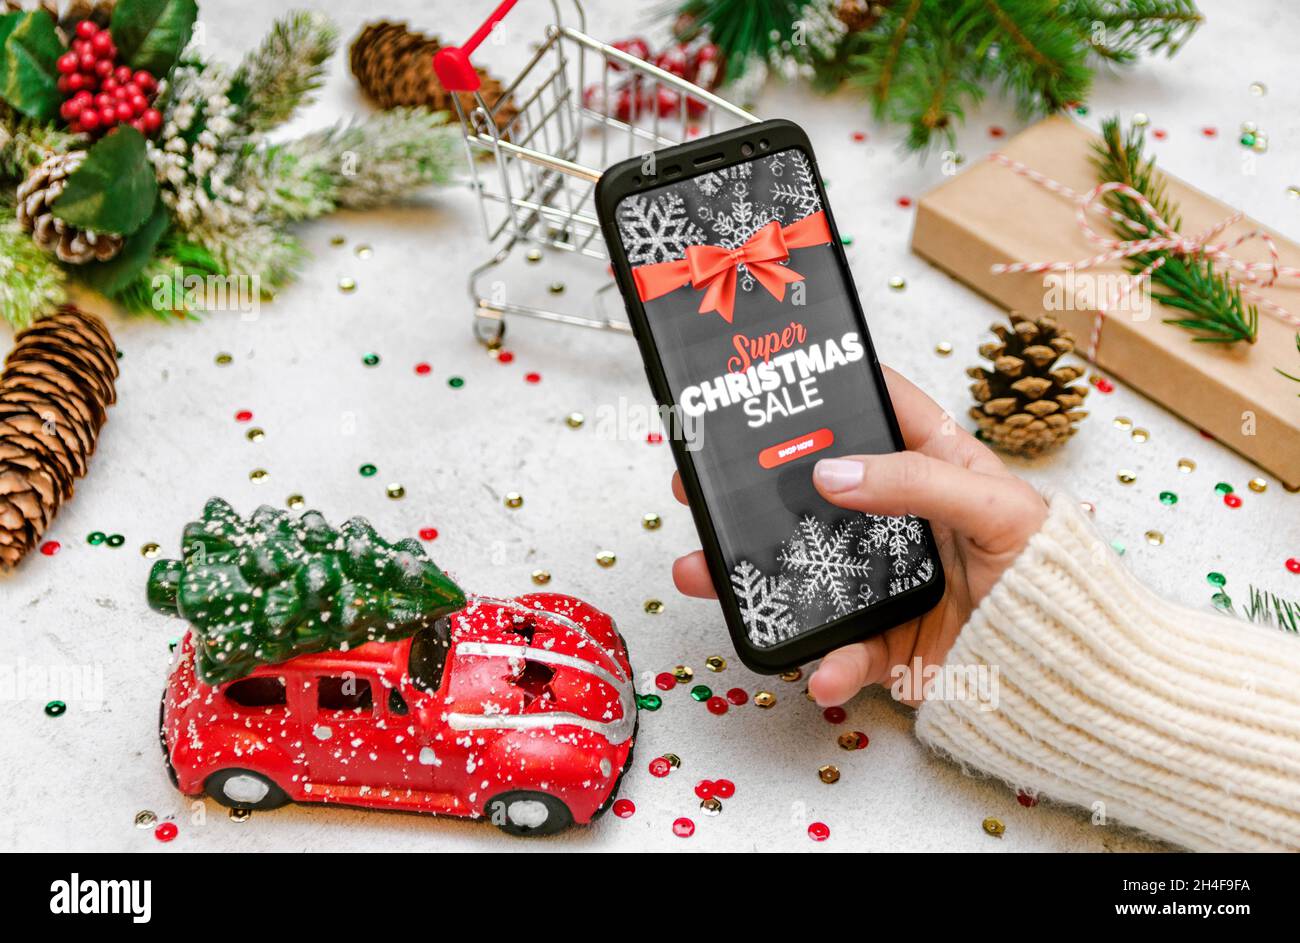 Woman in warm and cozy sweater holding a mobile phone and doing some online shopping. Christmas decorations and presents in frame on bright background Stock Photo